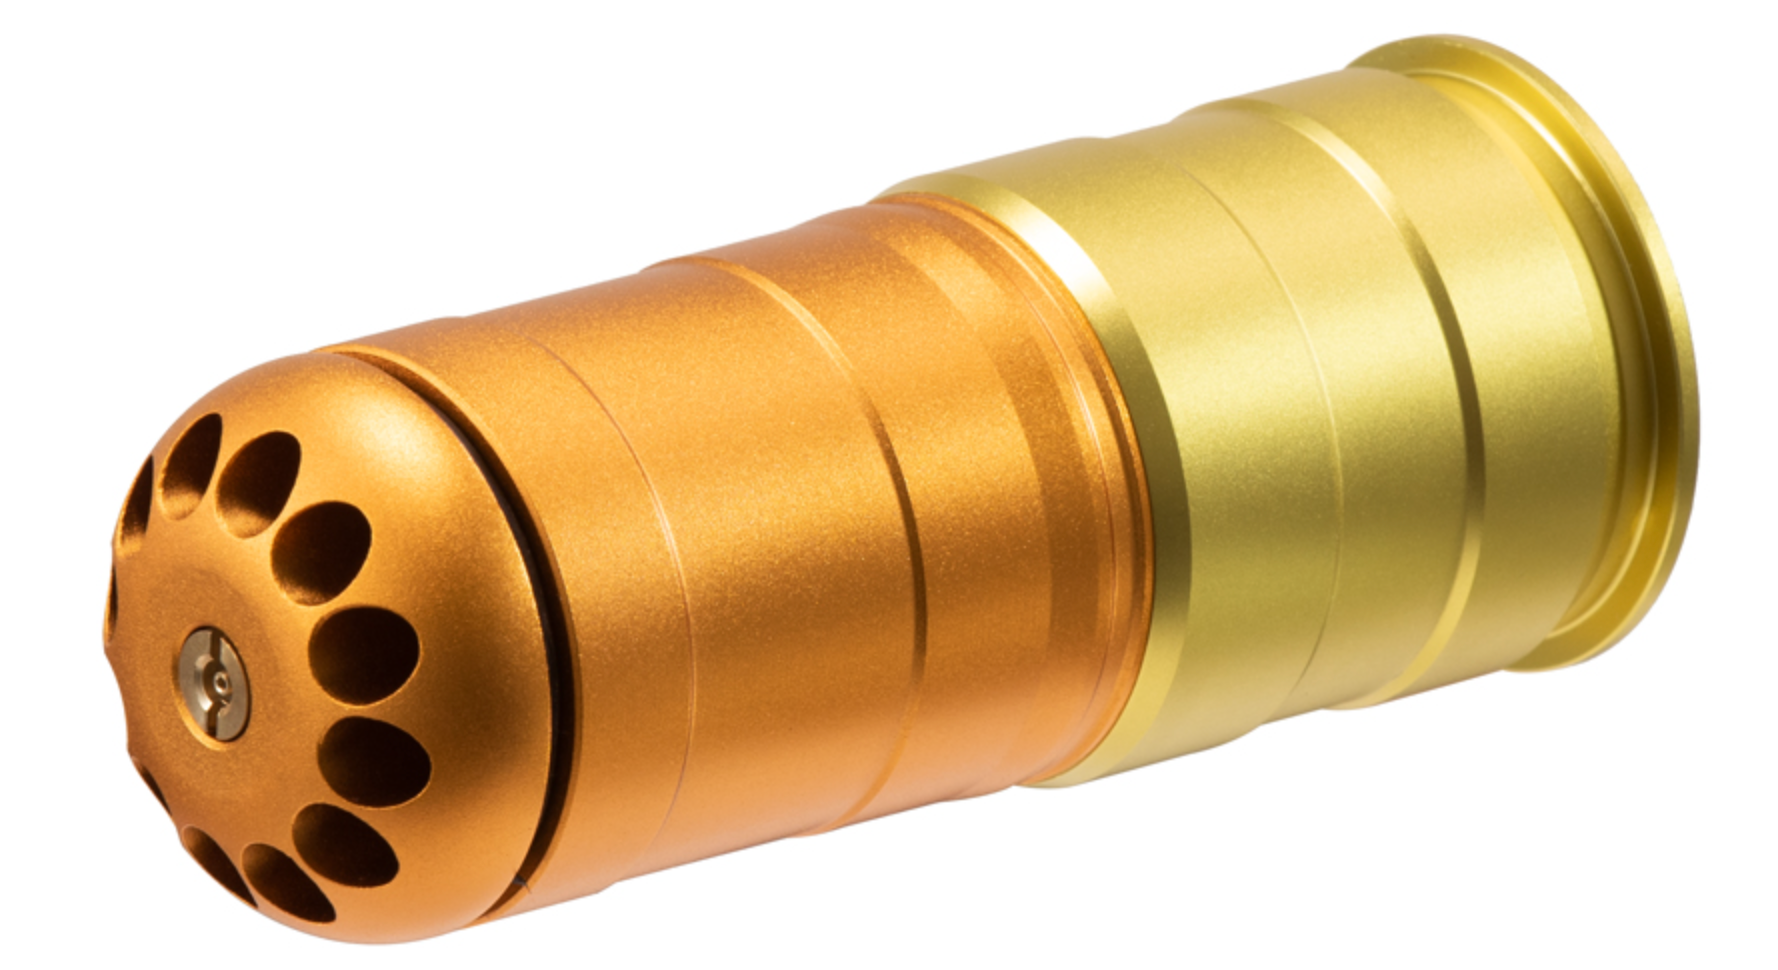 Lancer Tactical 40mm 120rd Gas Grenade Shell (Color: Gold)